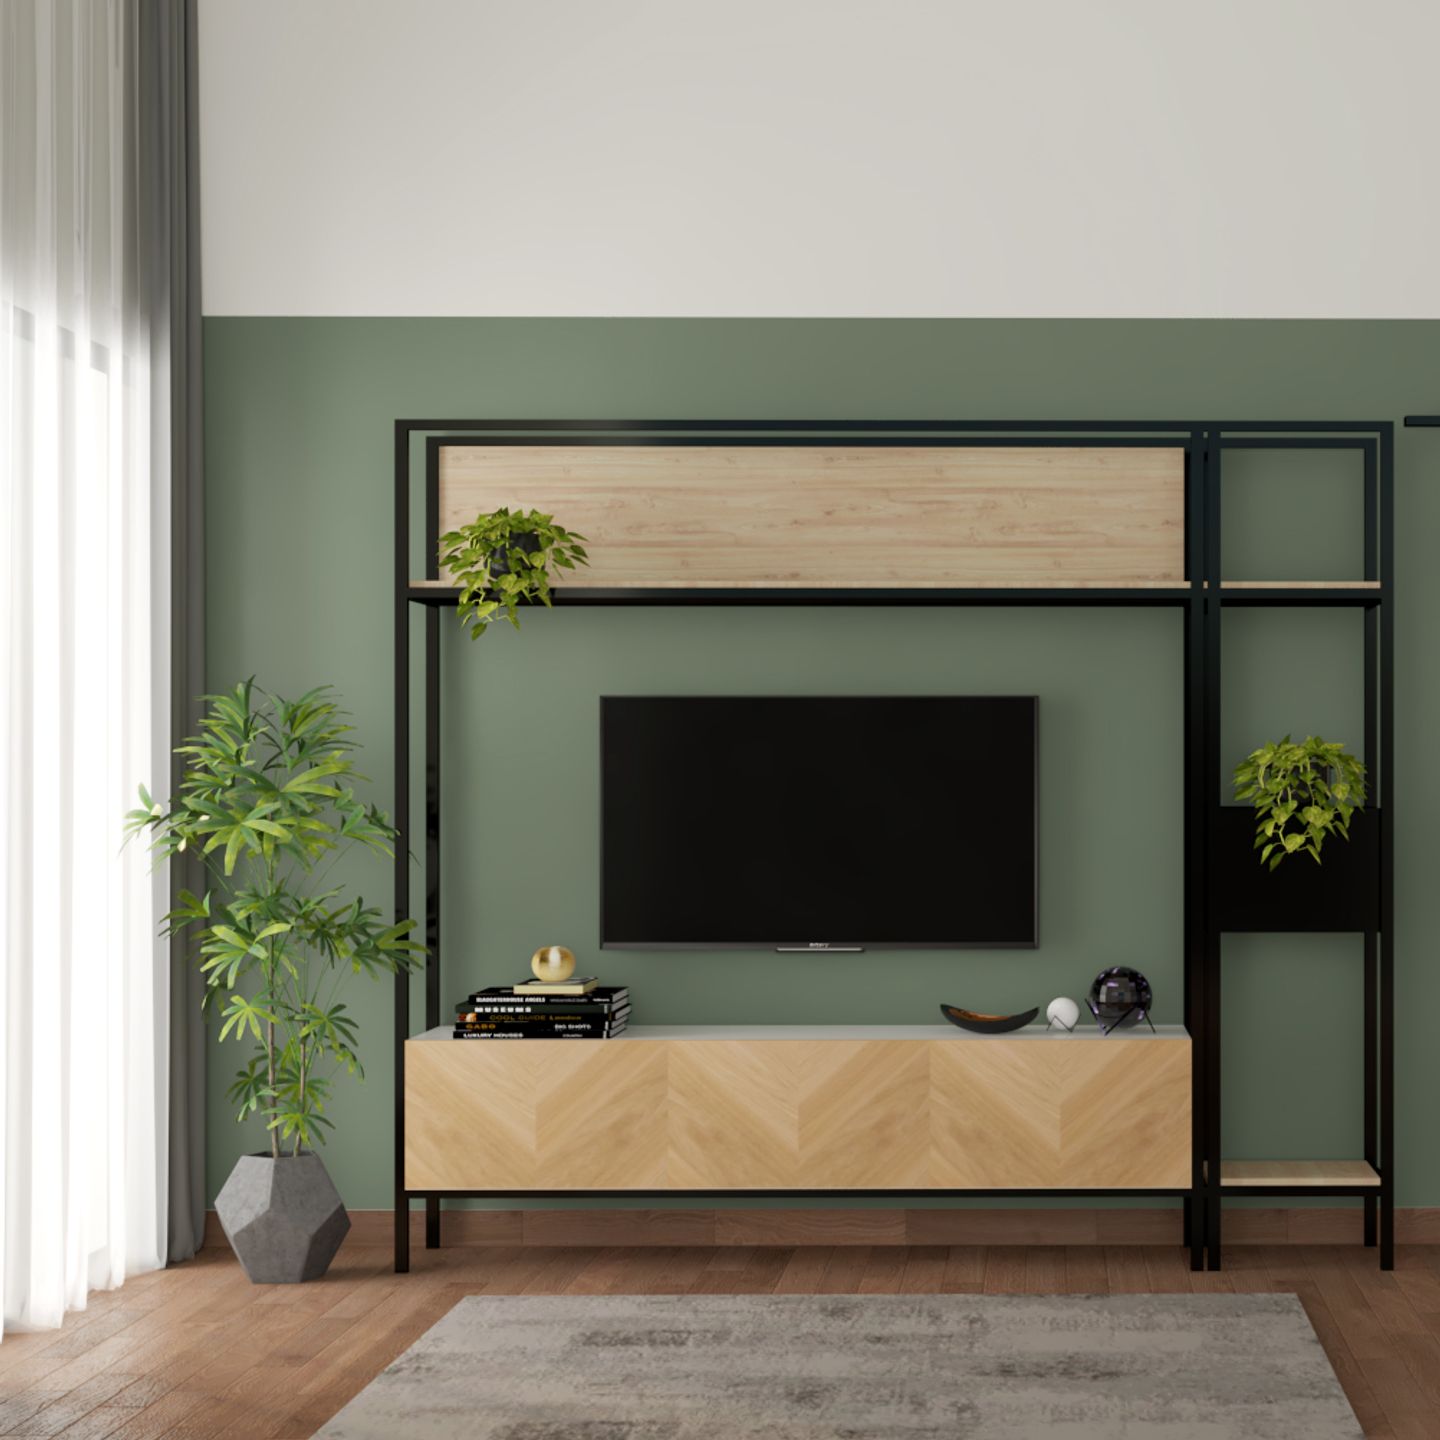 Living Room With Wooden TV Unit - Livspace